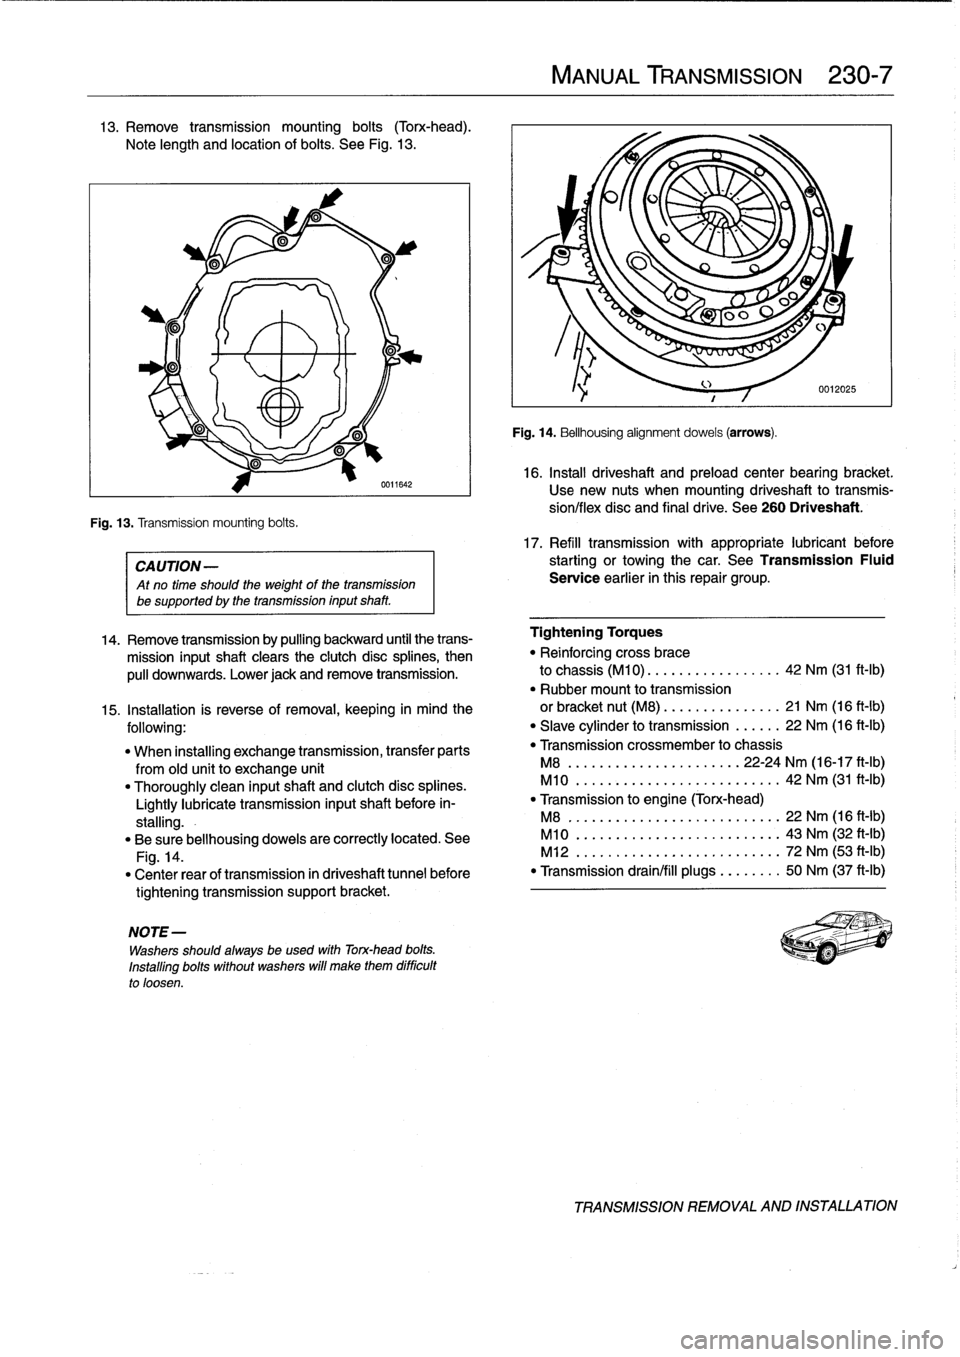 BMW 318i 1996 E36 Workshop Manual 13
.
Remove
transmission
mounting
bolts
(Torx-head)
.

Note
length
and
location
of
bolts
.
See
Fig
.
13
.

Fig
.
13
.
Transmission
mounting
bolts
.

0611642

CA
UTION-

Atno
time
should
the
weight
of
